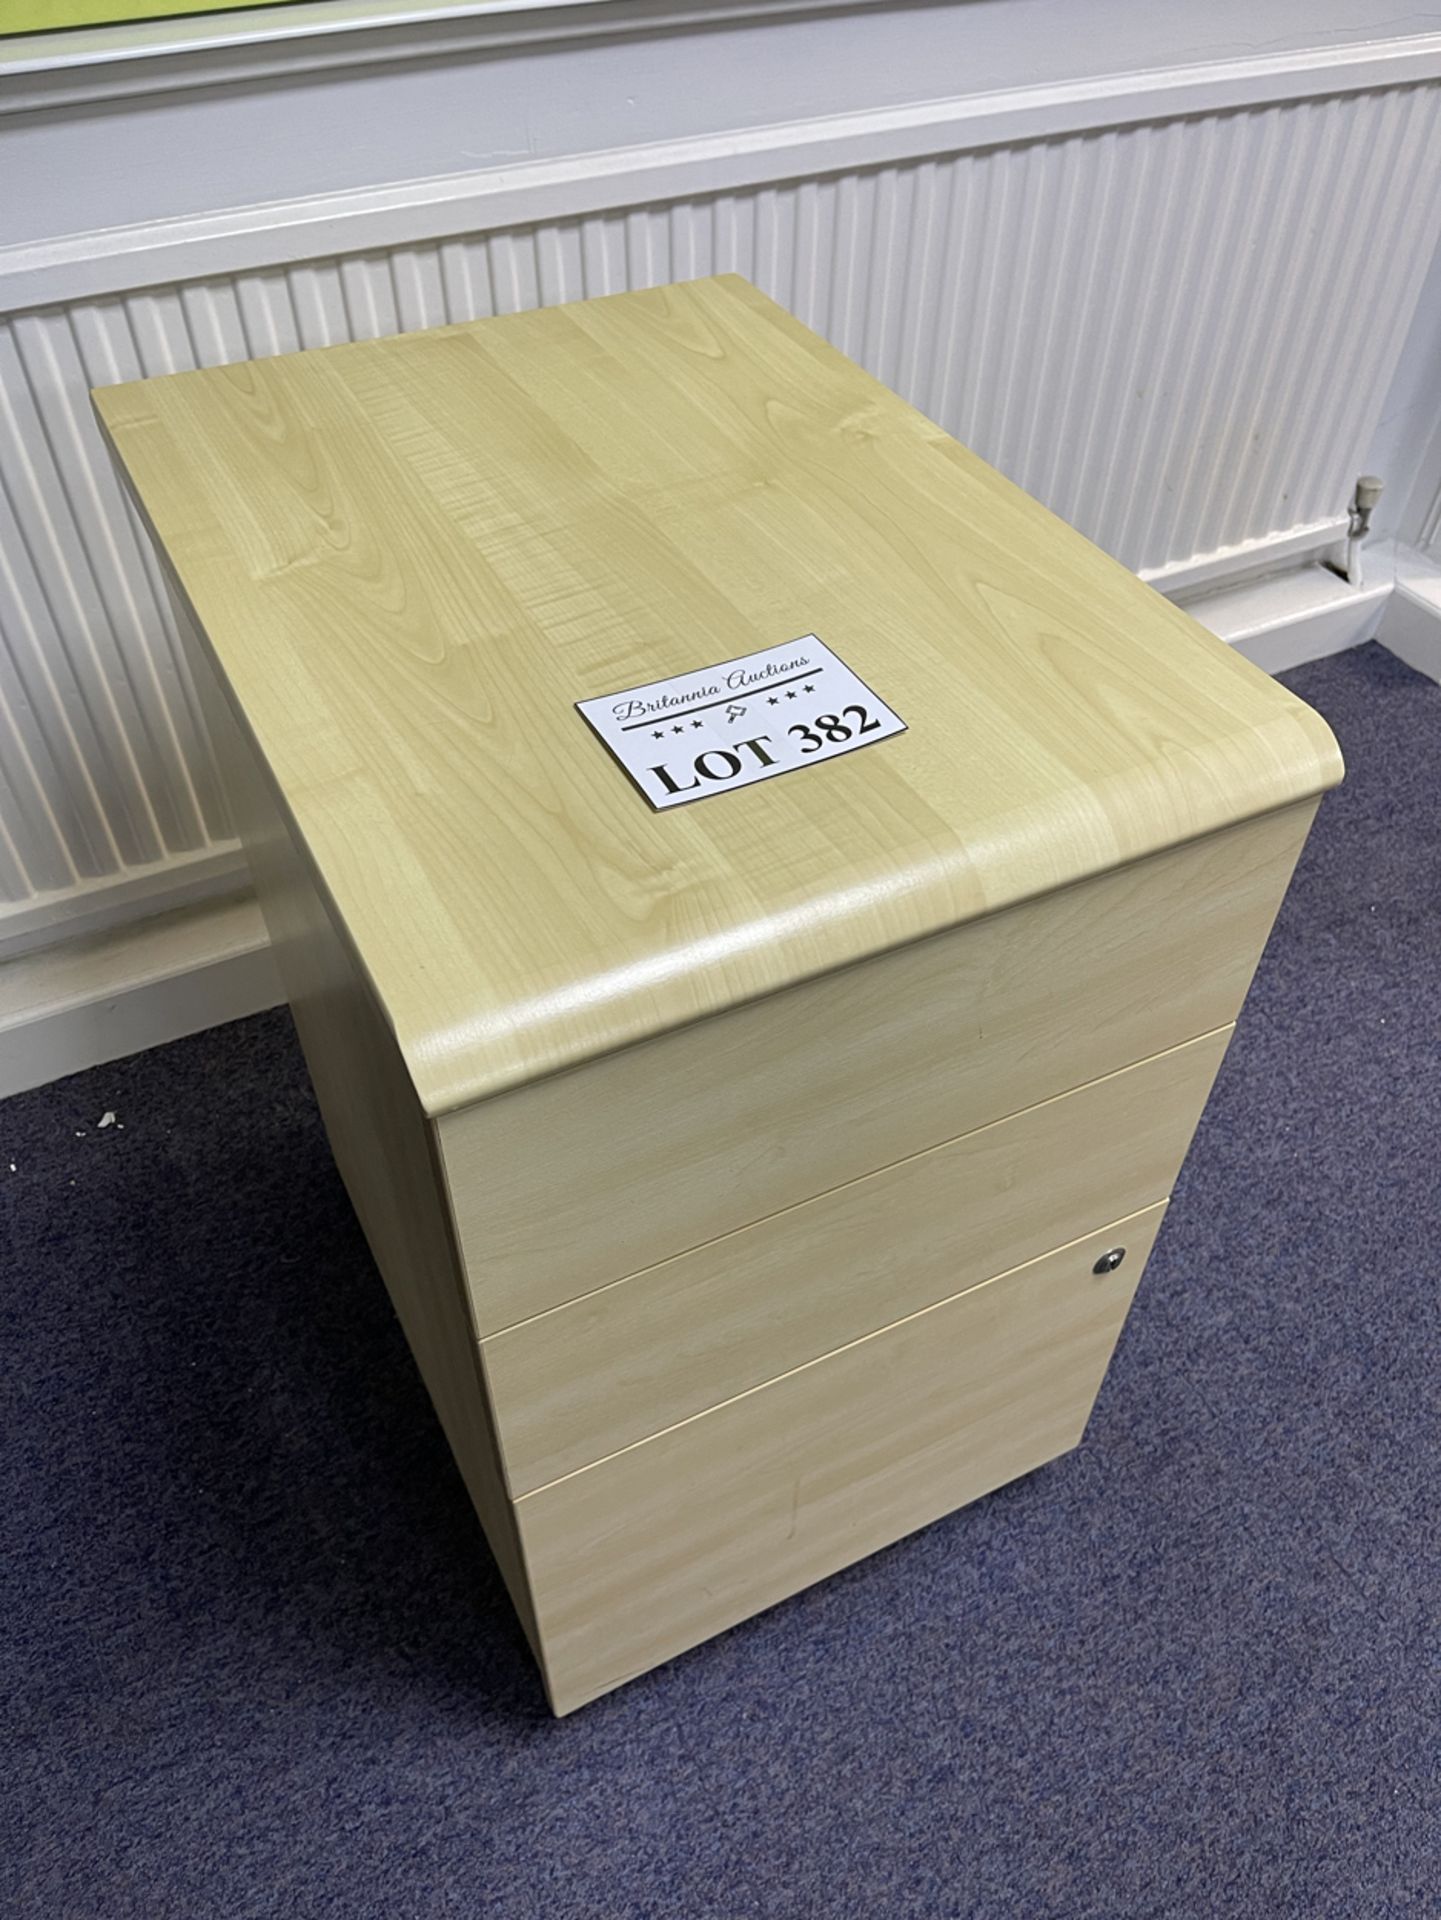 Set of Office Drawers. Dimensions 430mm x 600mm x 730mm High Approx. - Image 2 of 3